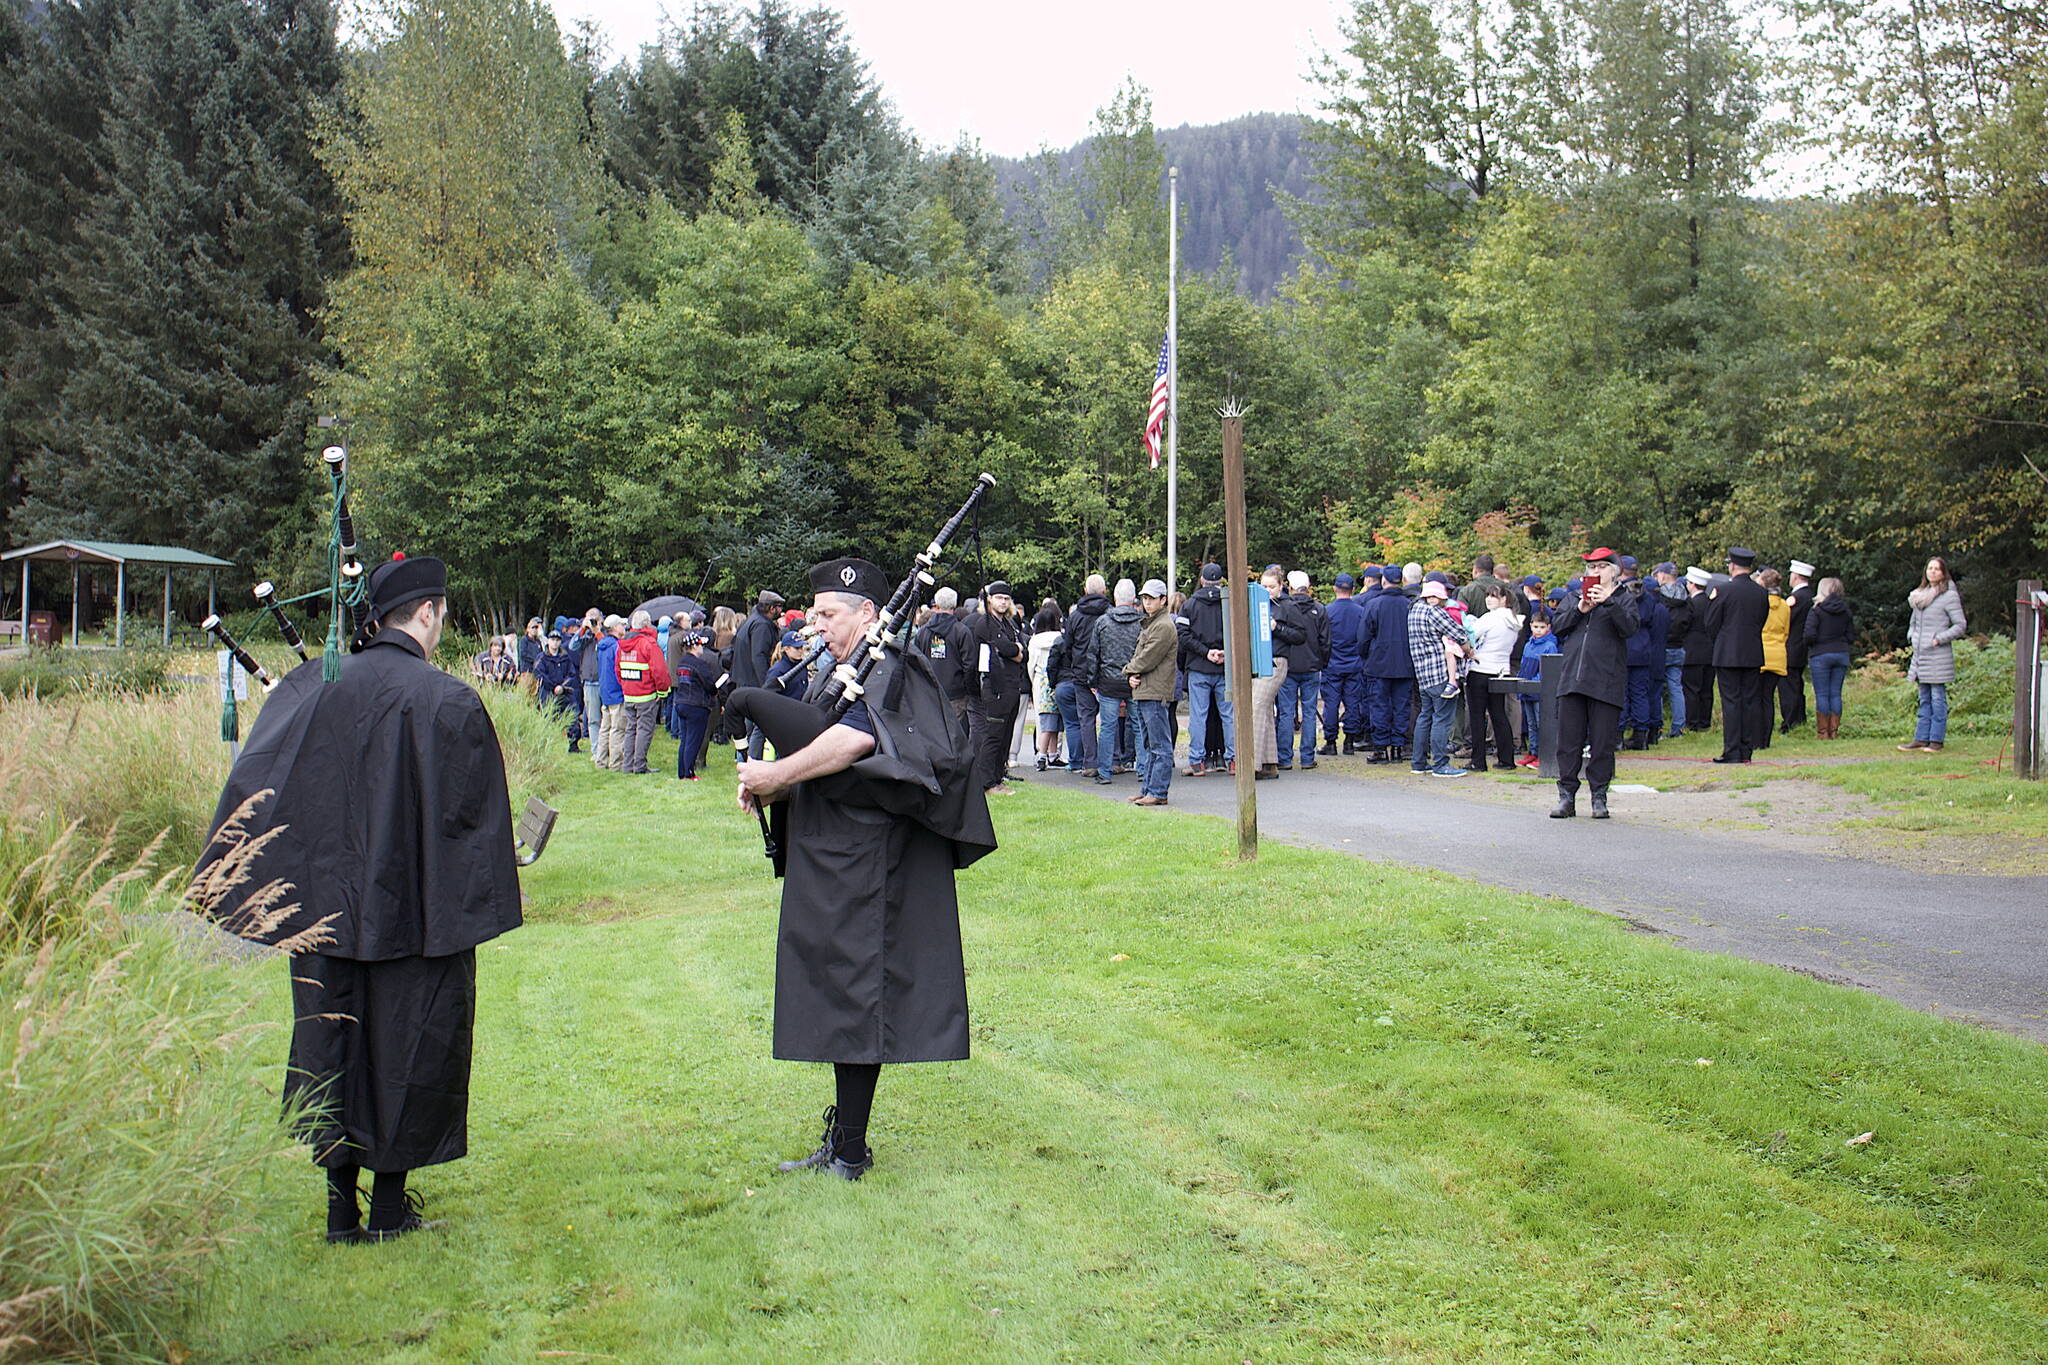 Jake Marnon (left) and his father Scott play “Amazing Grace” at the conclusion of a ceremony Monday at the September 11th Memorial at Riverside Rotary Park commemorating the terrorist attacks on that date in 2001. (Mark Sabbatini / Juneau Empire)